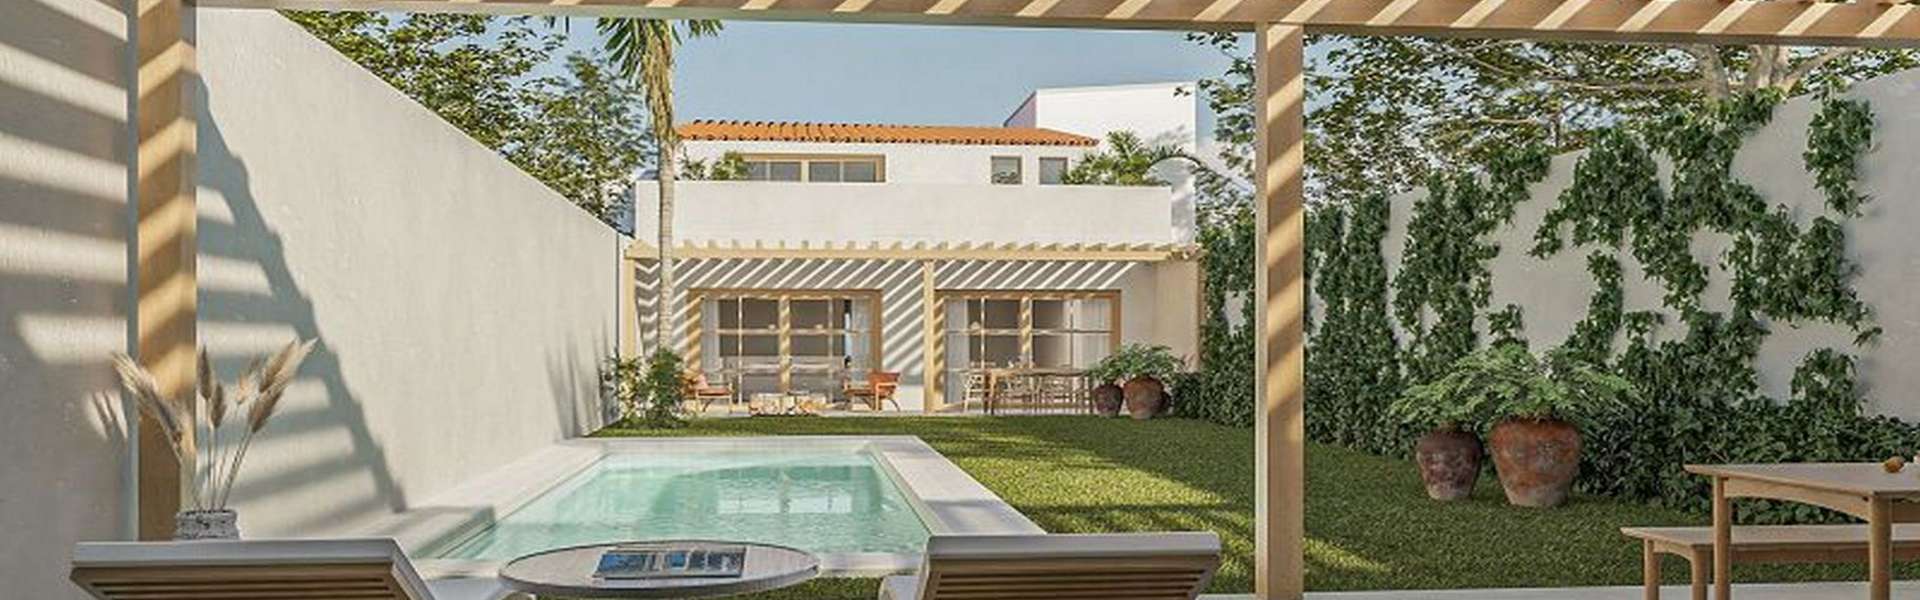 Felanitx - Charming townhouse with patio & pool 